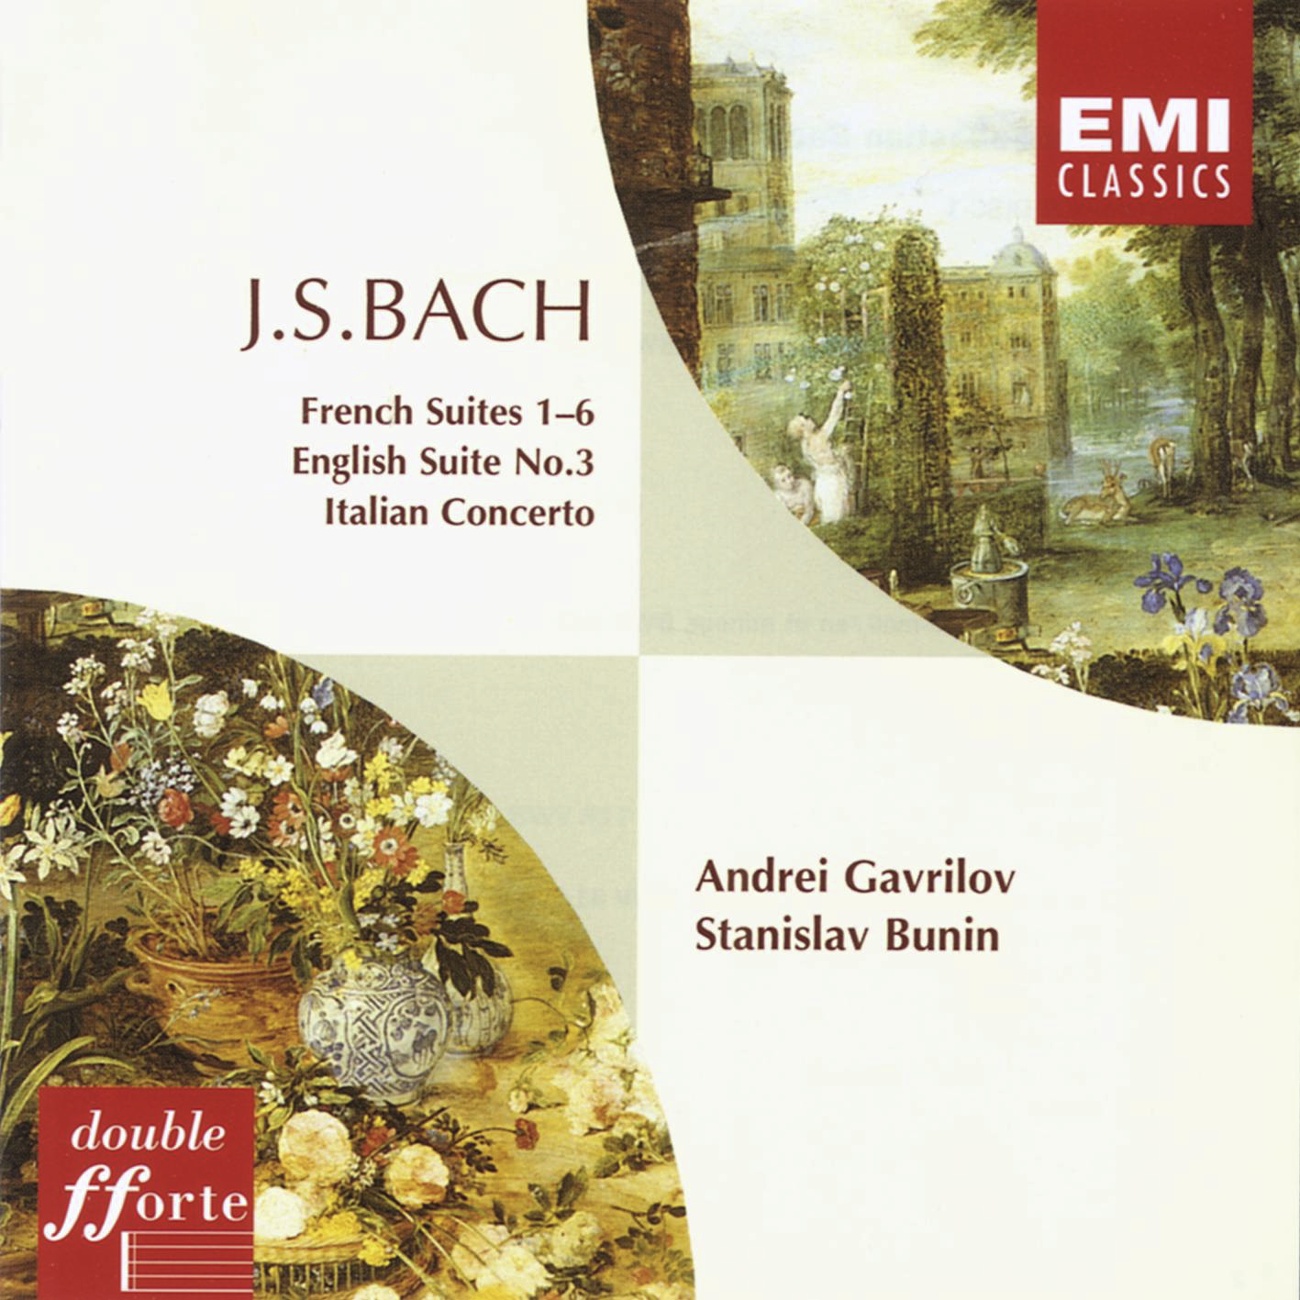 BACH: FRENCH SUITE 4 IN E FLAT, BWV 815: II. COURANTE